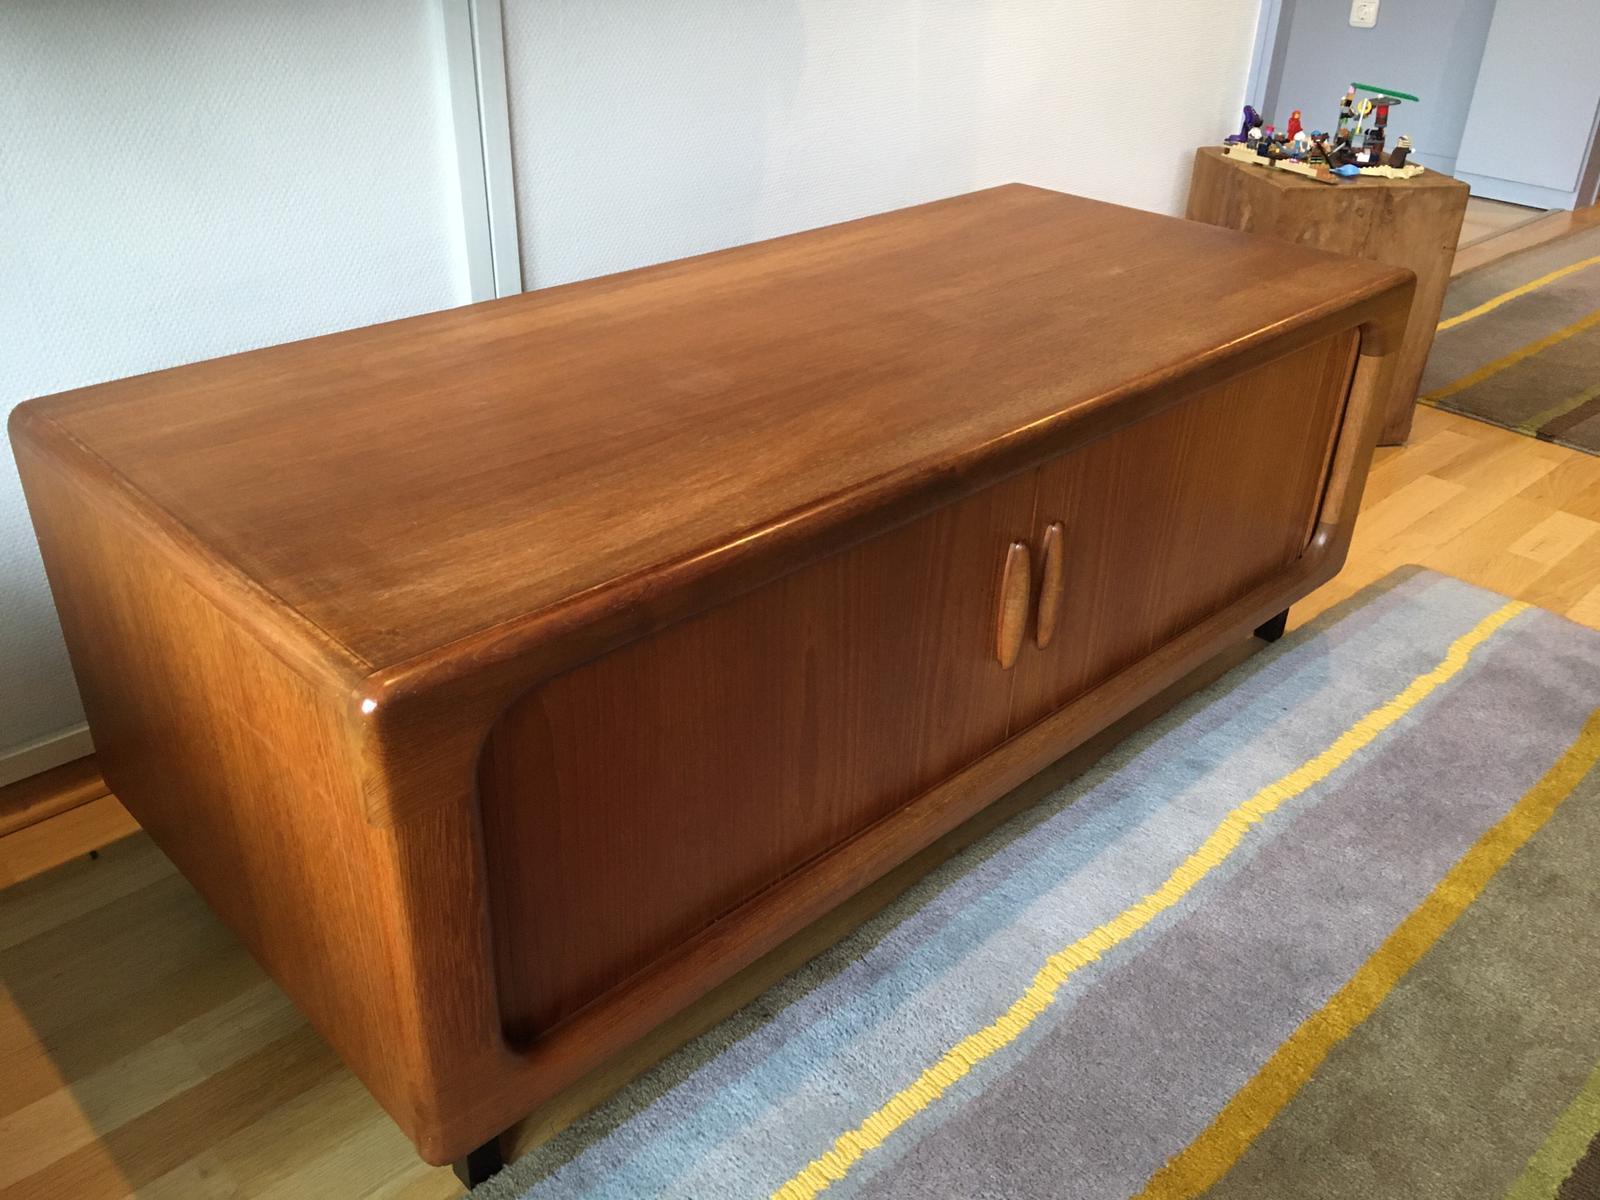 Mid century tv rack side board, with tambour doors, designed and manufactured by Dyrlund of Denmark. Produced in beautifully grained teak this piece is another classic example of Dyrlund's craftsmanship. The sheer quality of the finish is why they